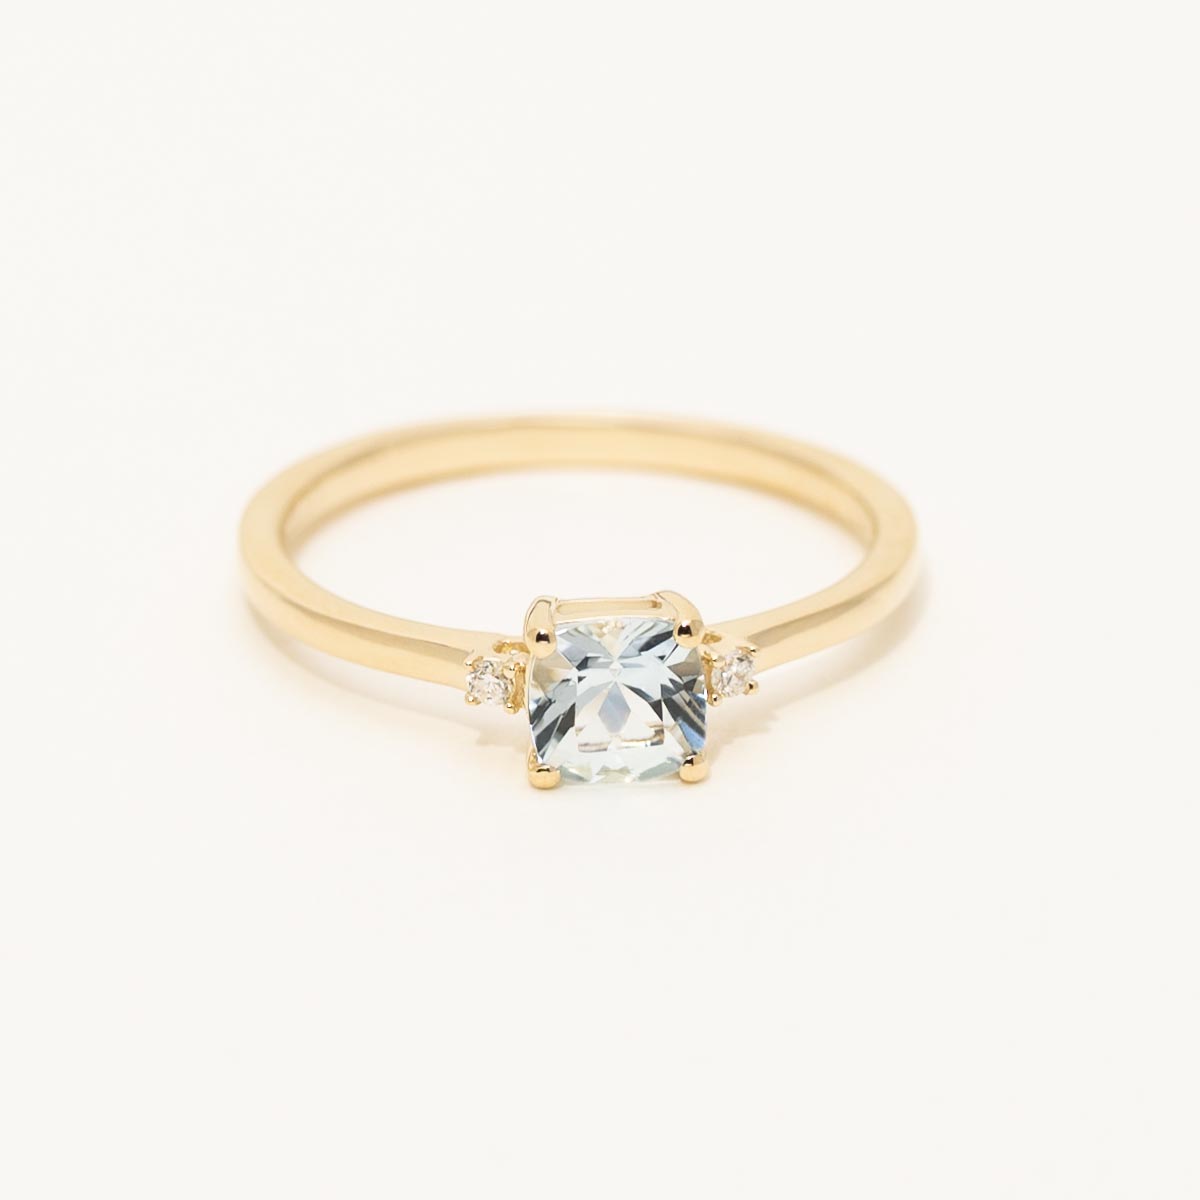 Cushion Cut Aquamarine Ring in 10kt Yellow Gold with Diamonds (.02ct tw)